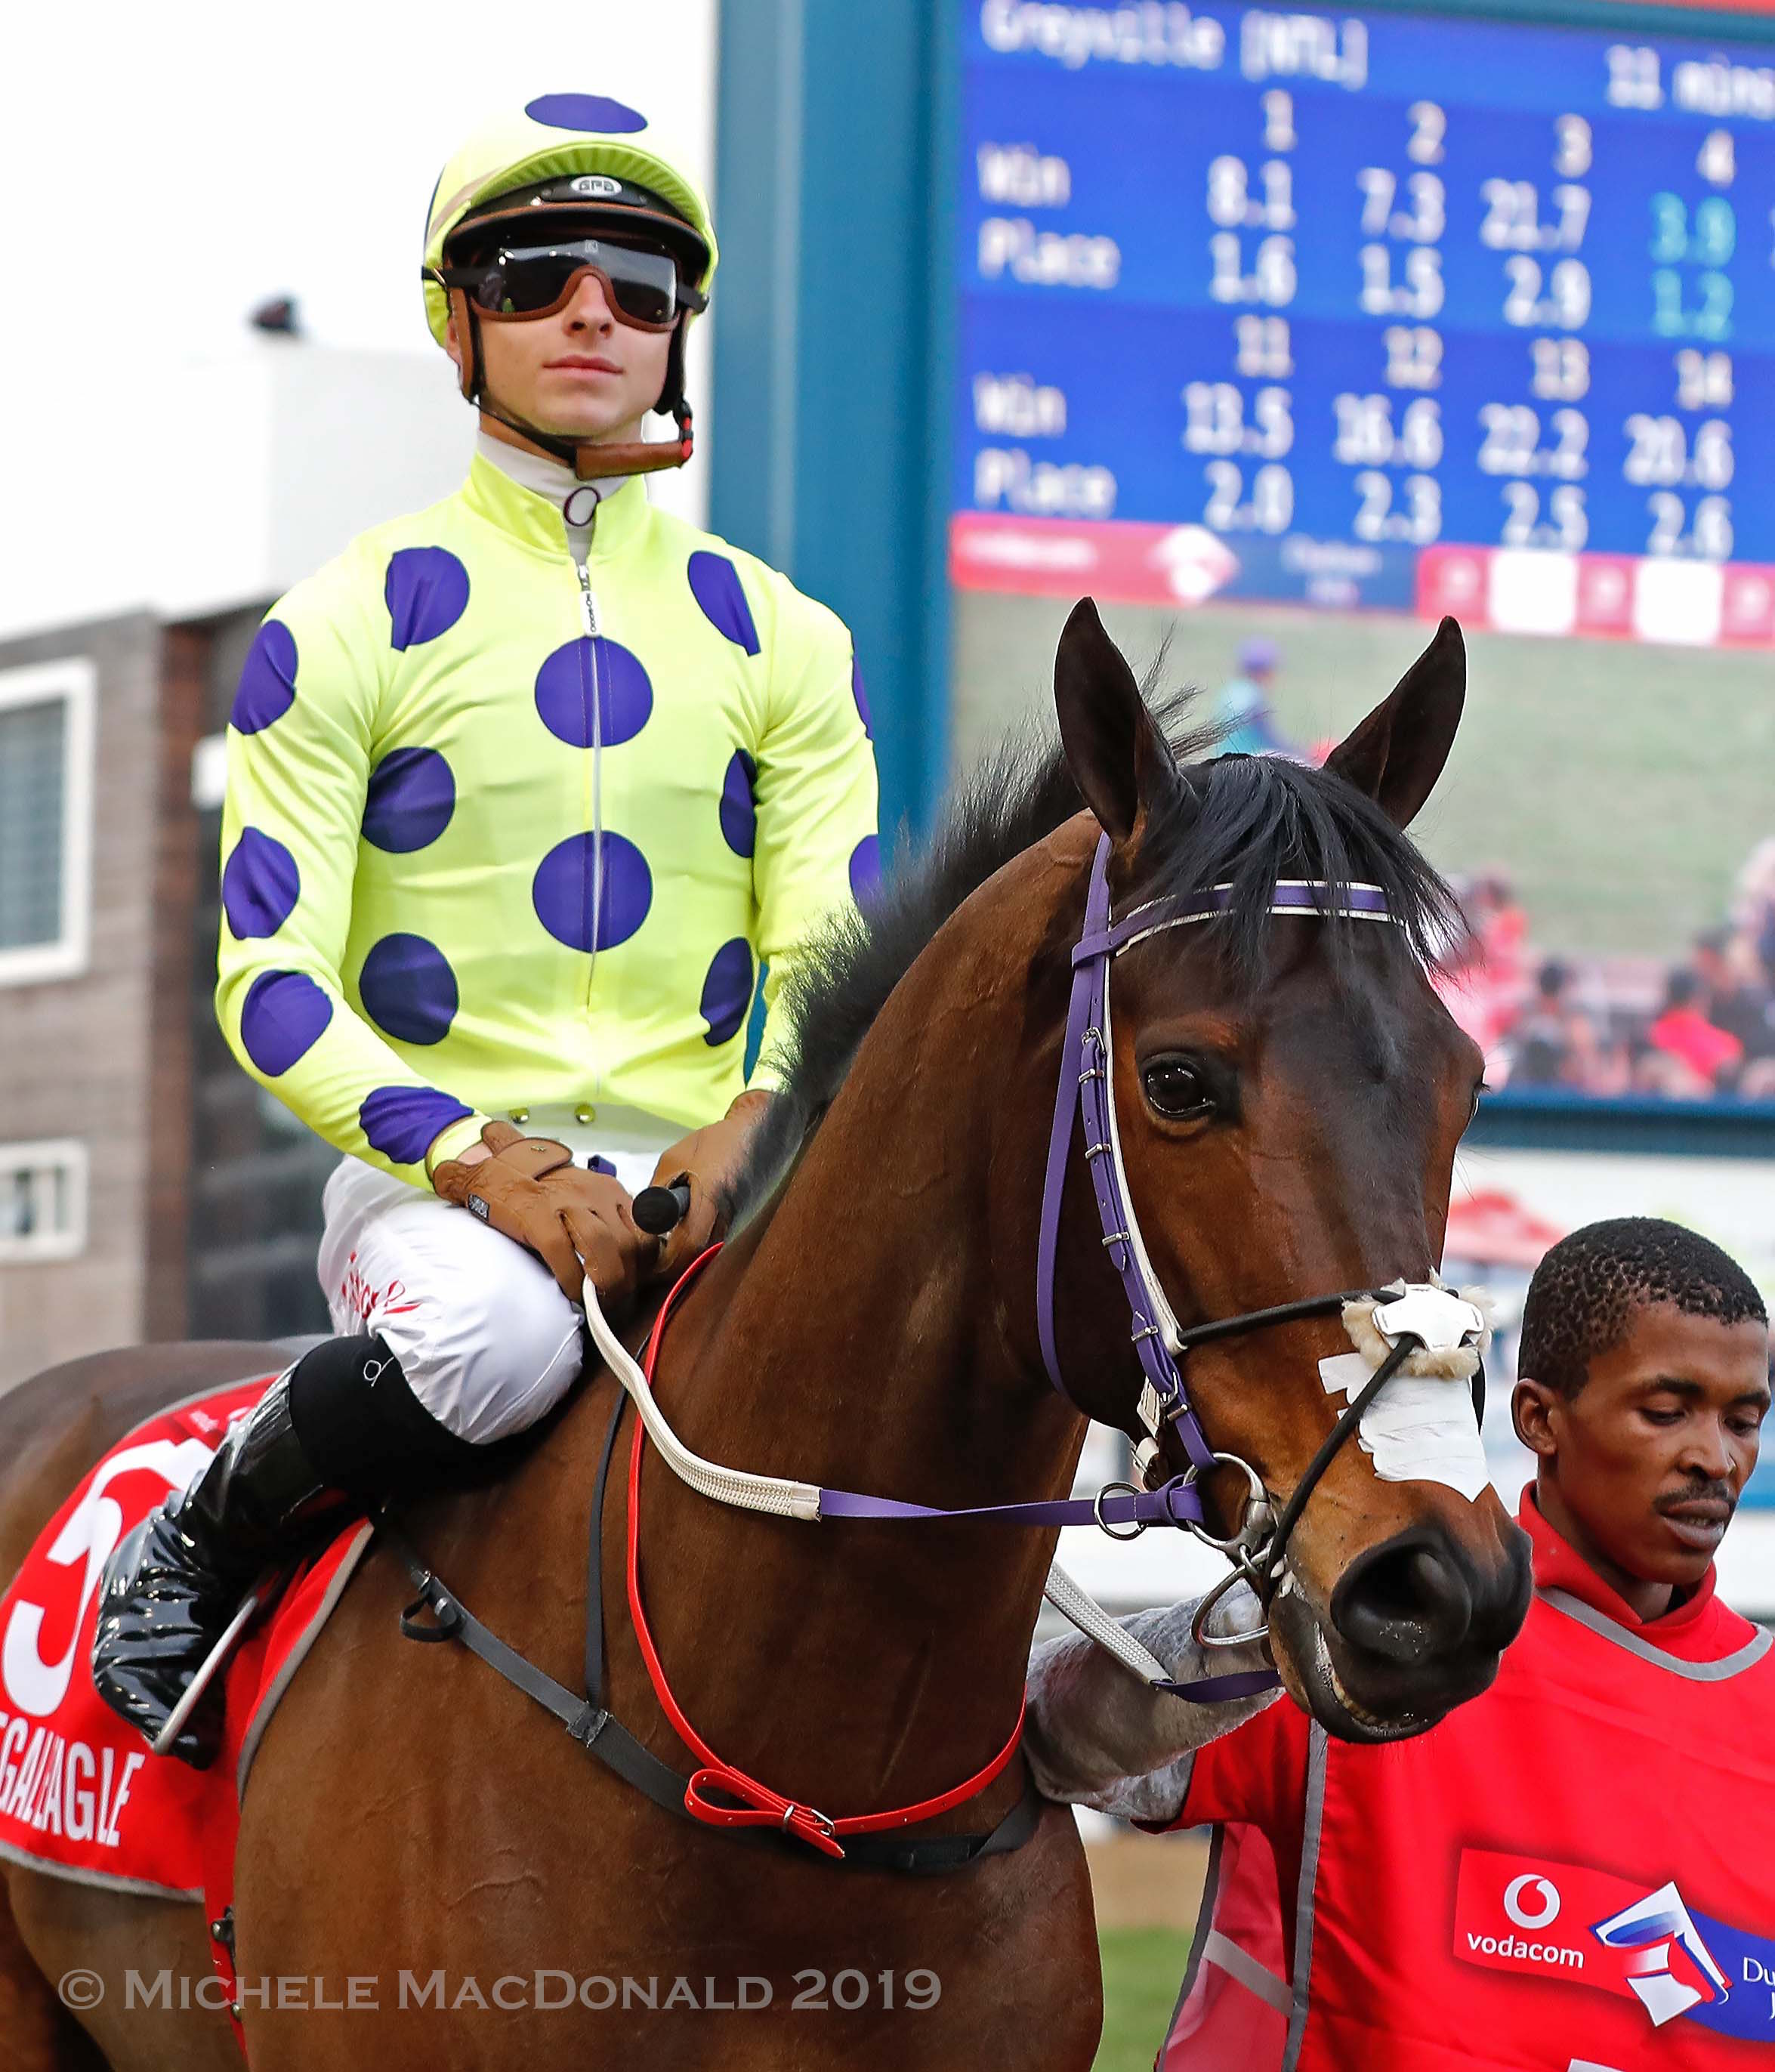 Date with a legend: Lyle Hewitson in the Durban July post parade on the Sean Tarry-trained Legal Eagle, two-time South African Horse of the Year and eight-time G1 winner. Photo: Michele MacDonald